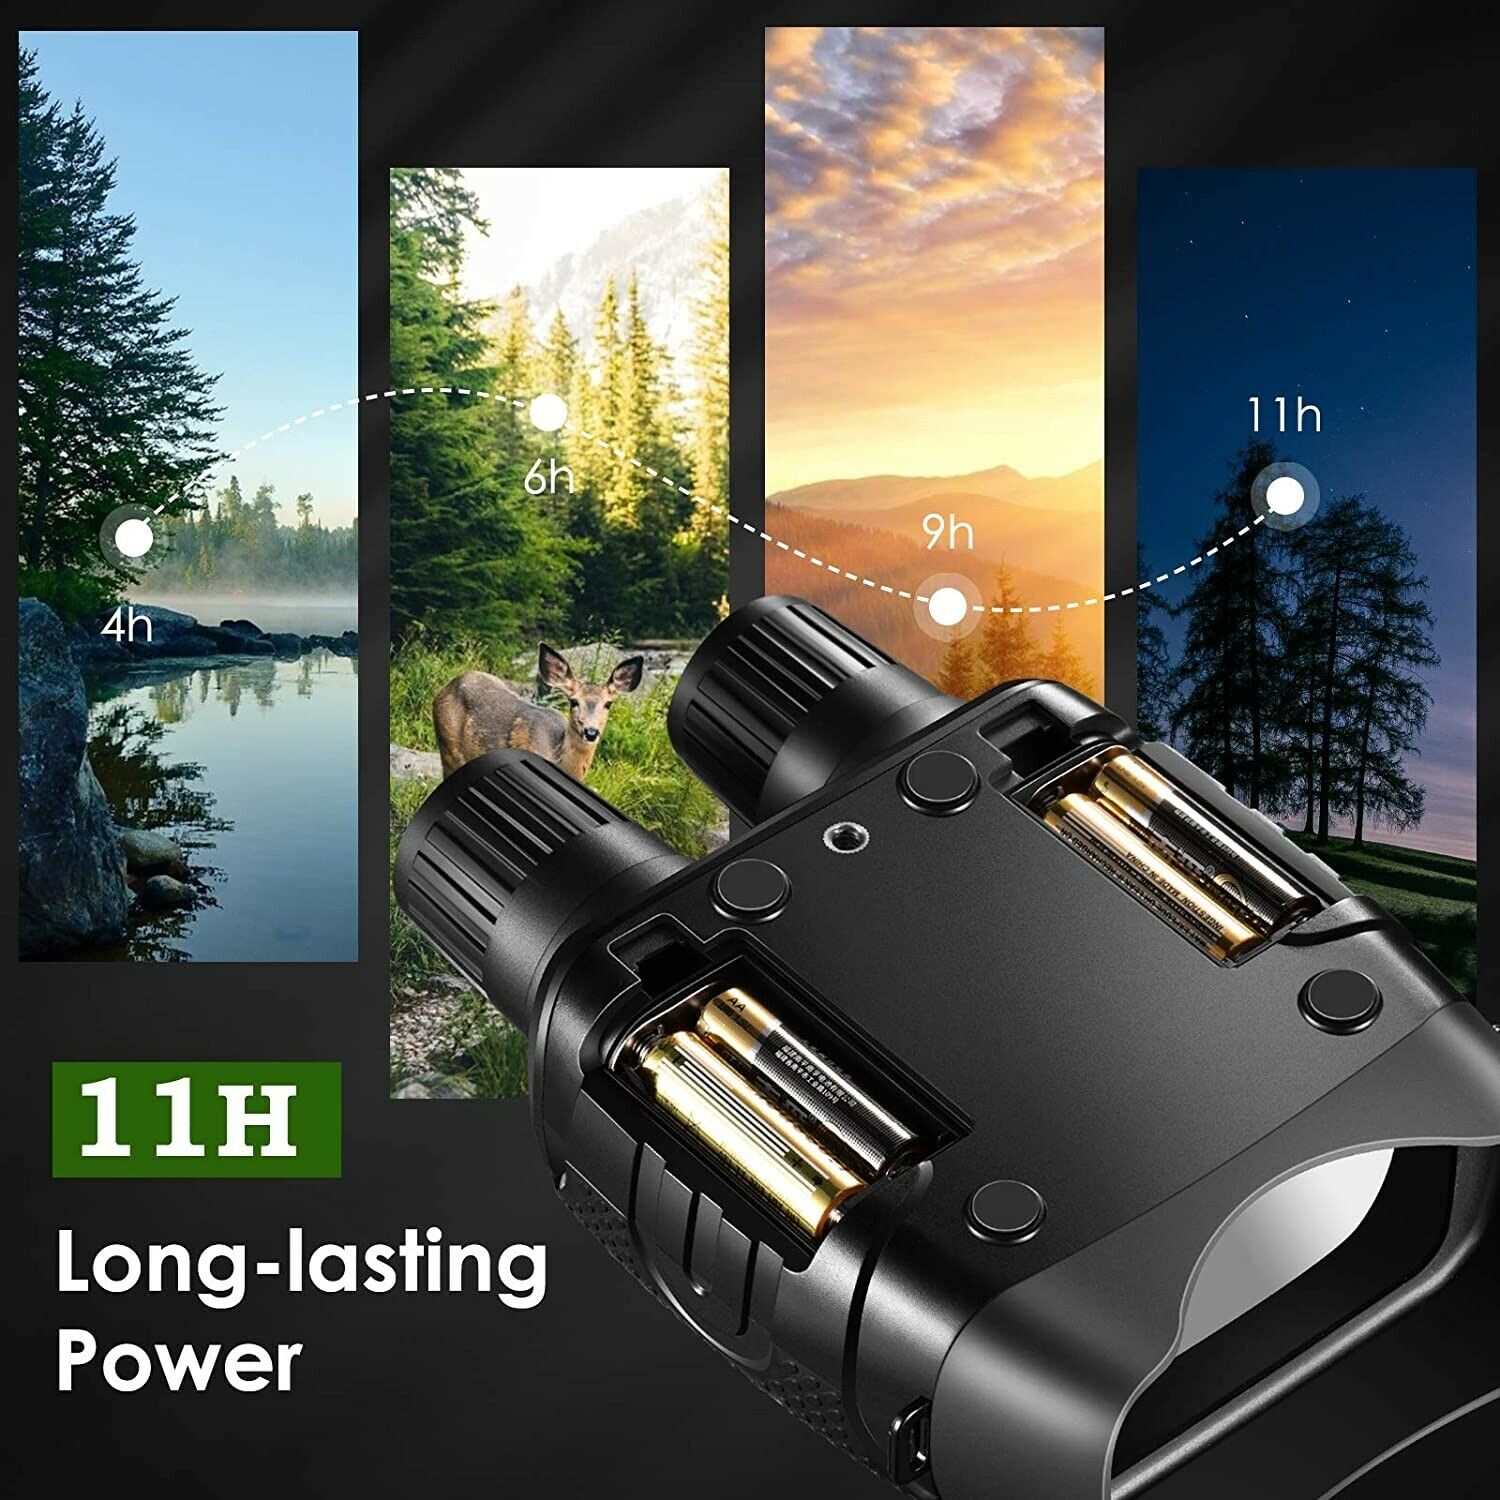 A pair of infrared night vision binoculars showcased against a segmented background representing different times of the day, illustrating its effectiveness from 4 hours to 11 hours in various natural settings. The text at the bottom reads ‘11H Long-lasting Power’.